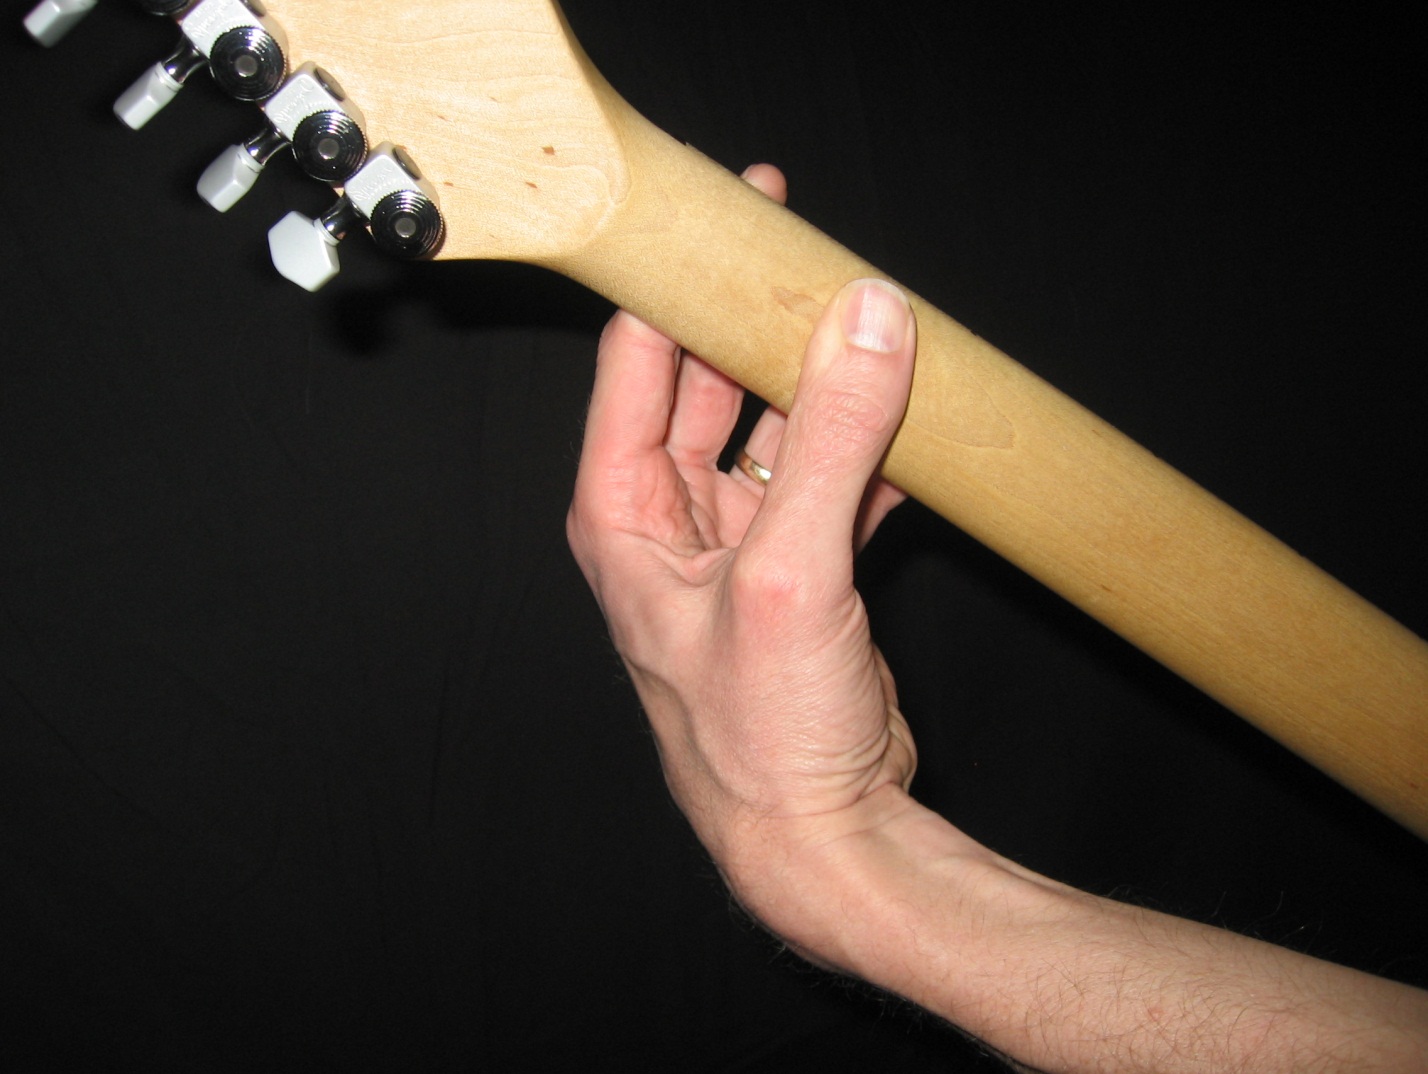 How to Play Barre Chords - Notes on a Guitar